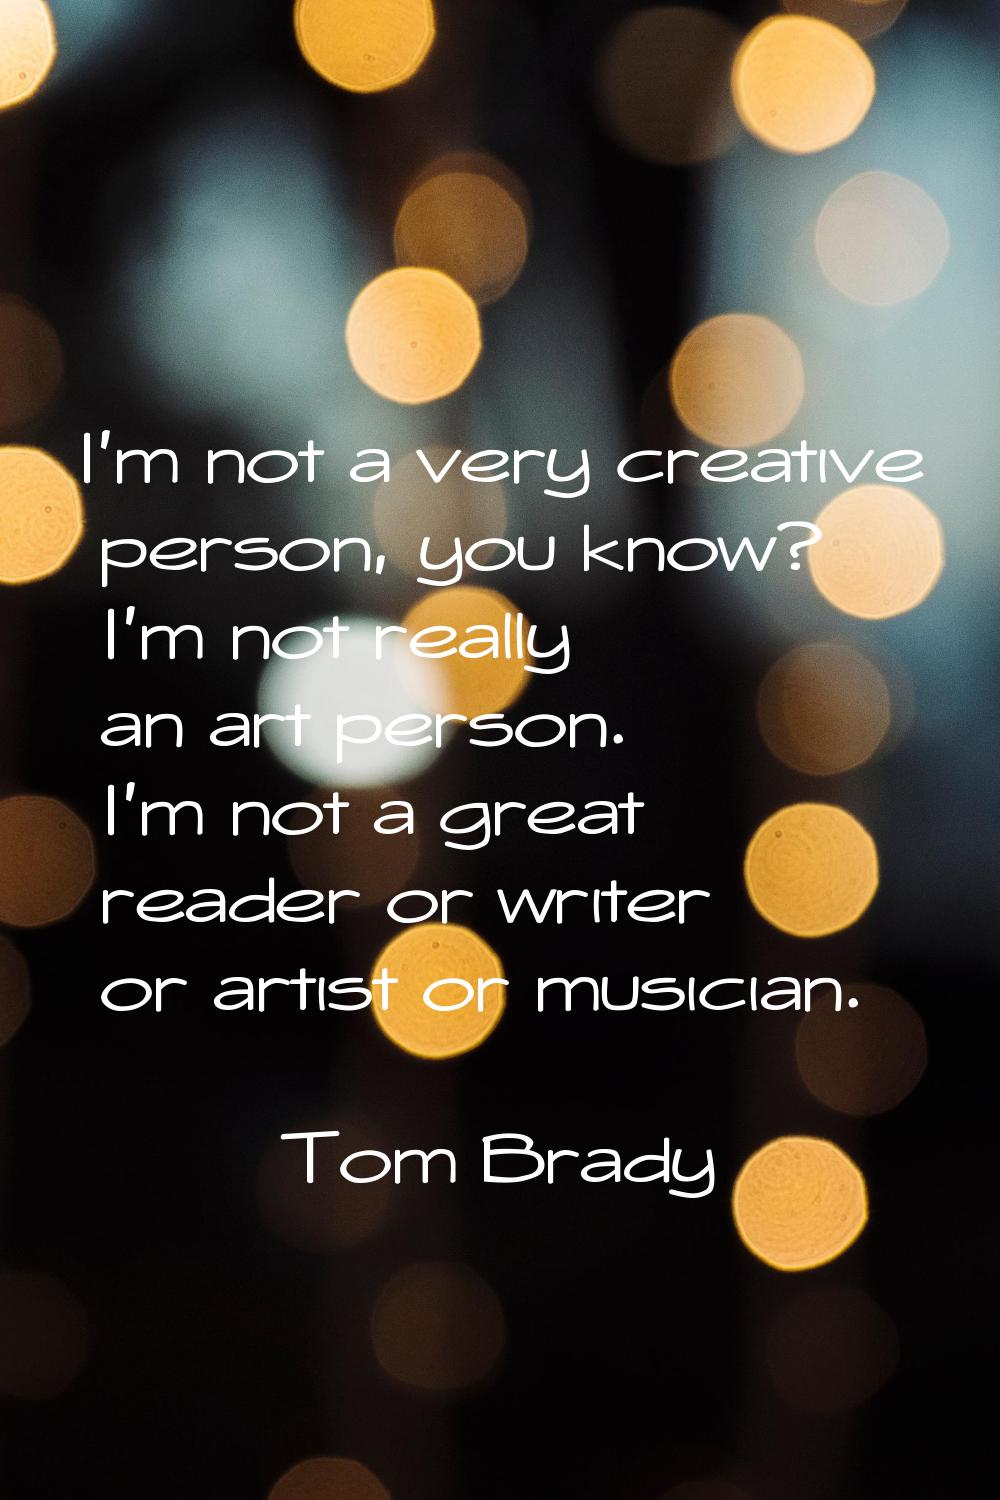 I'm not a very creative person, you know? I'm not really an art person. I'm not a great reader or w